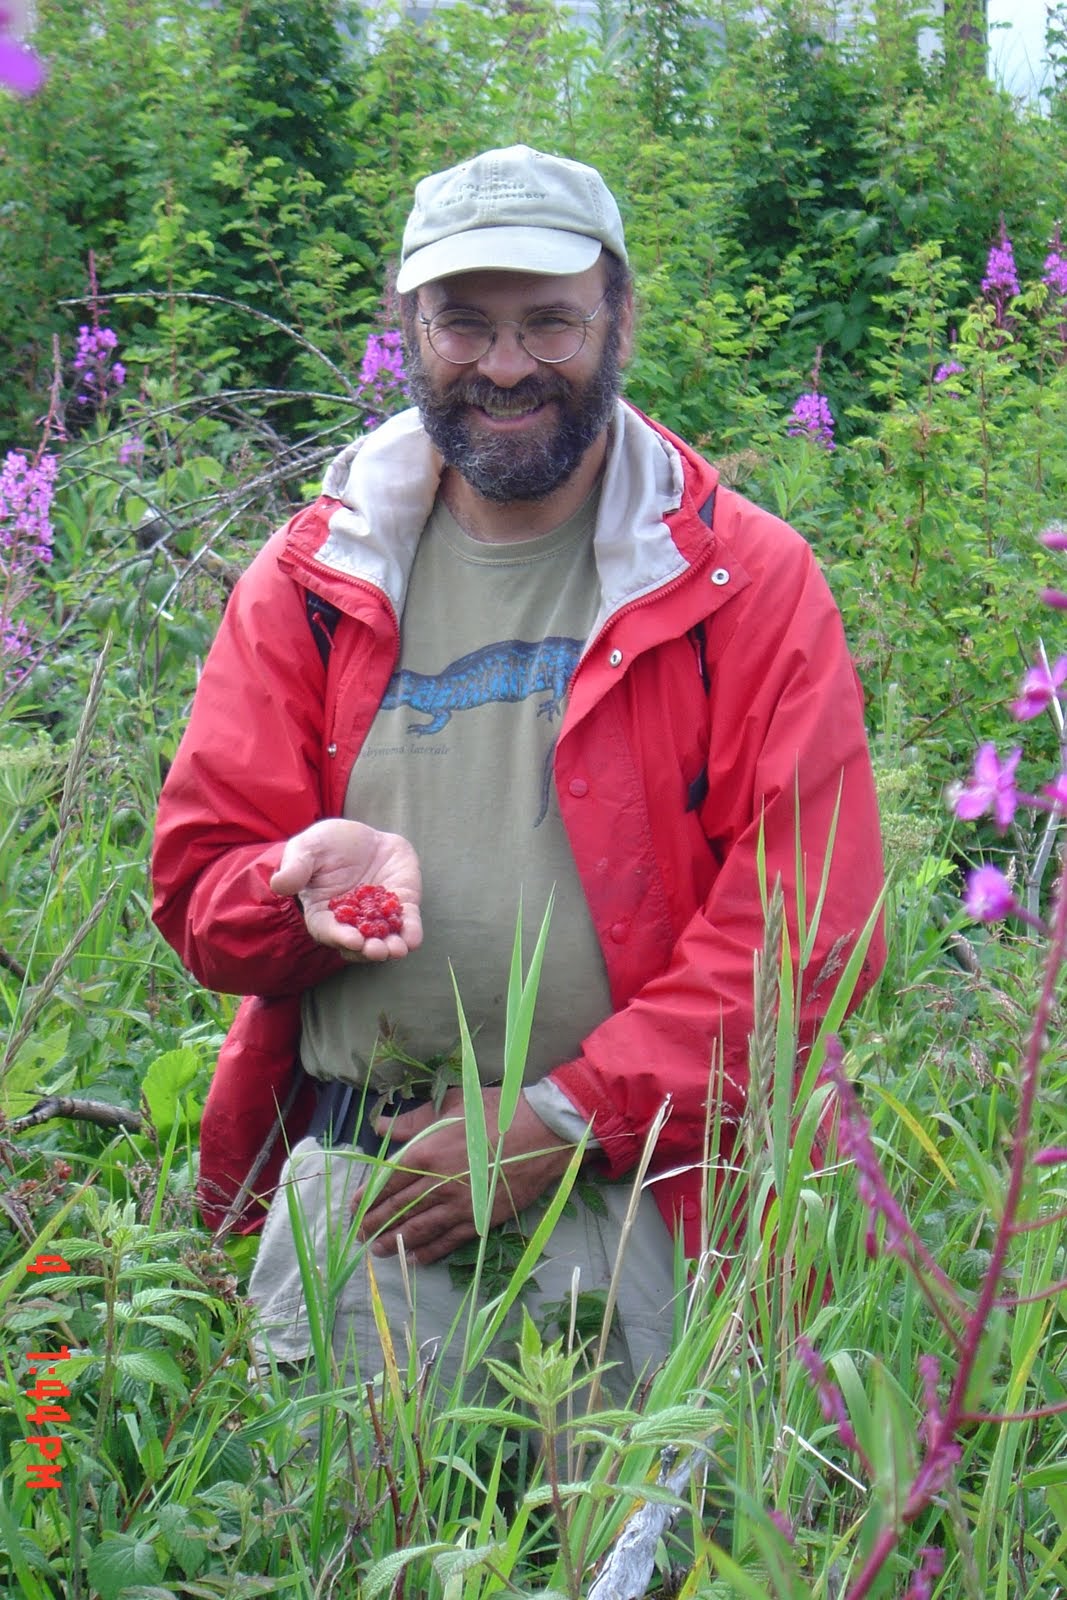 Edible Wild Plant Ramble with Russ Cohen Monday, May 9, 2022 Noon - 2:00 P.M.